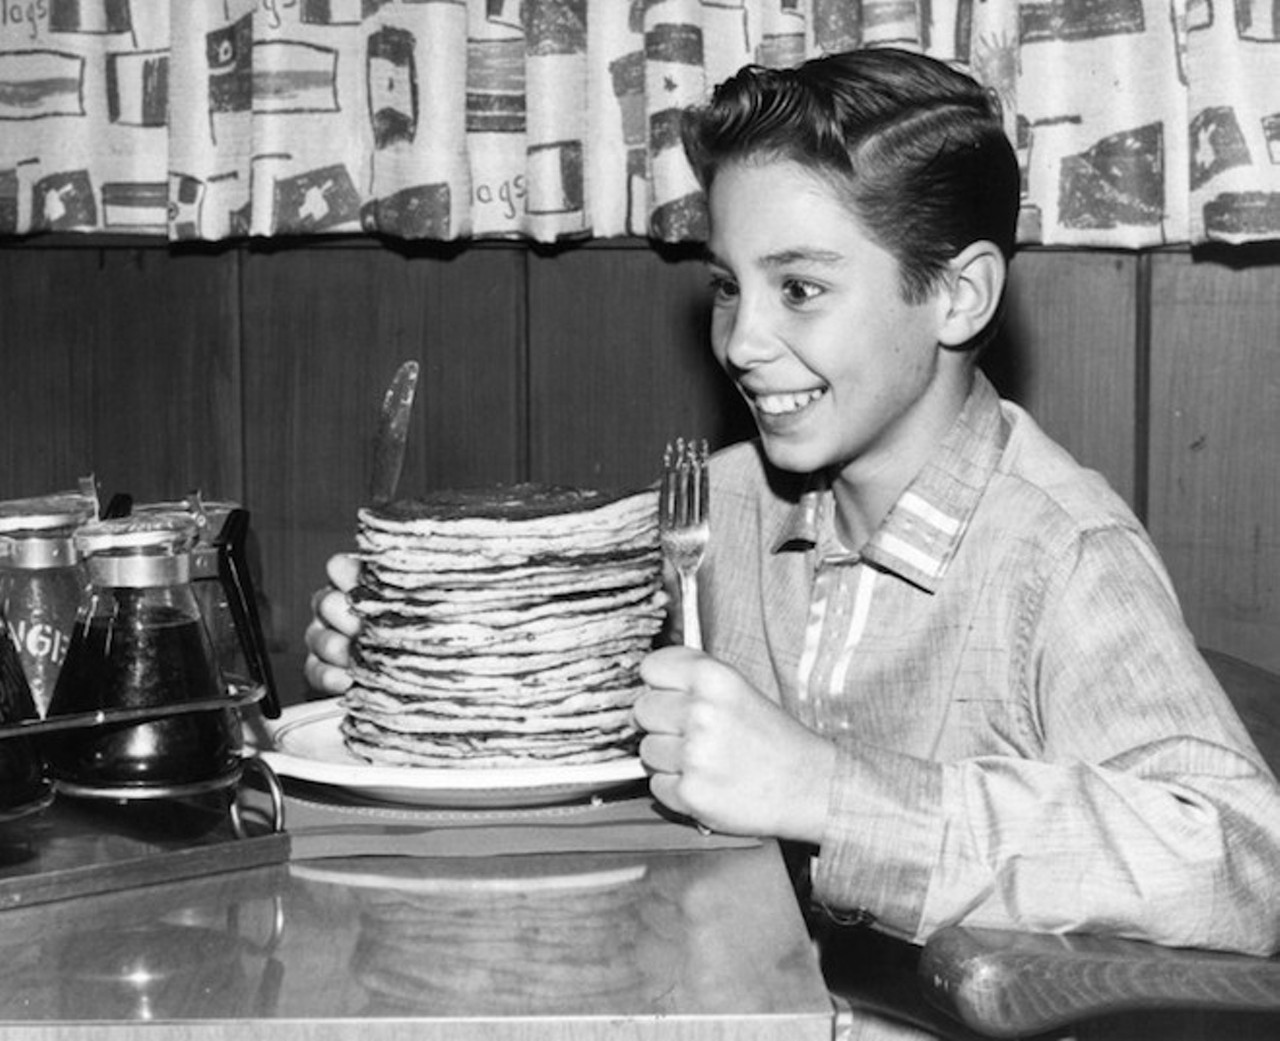 circa 1960:  Child actor Johnny Crawford looks forward to eating a pile of pancakes in an International House of Pancakes, a chain of eateries in the USA started in 1958 by Californian brothers Al and Jerome Lapin.  (Photo by Keystone Features/Getty Images)